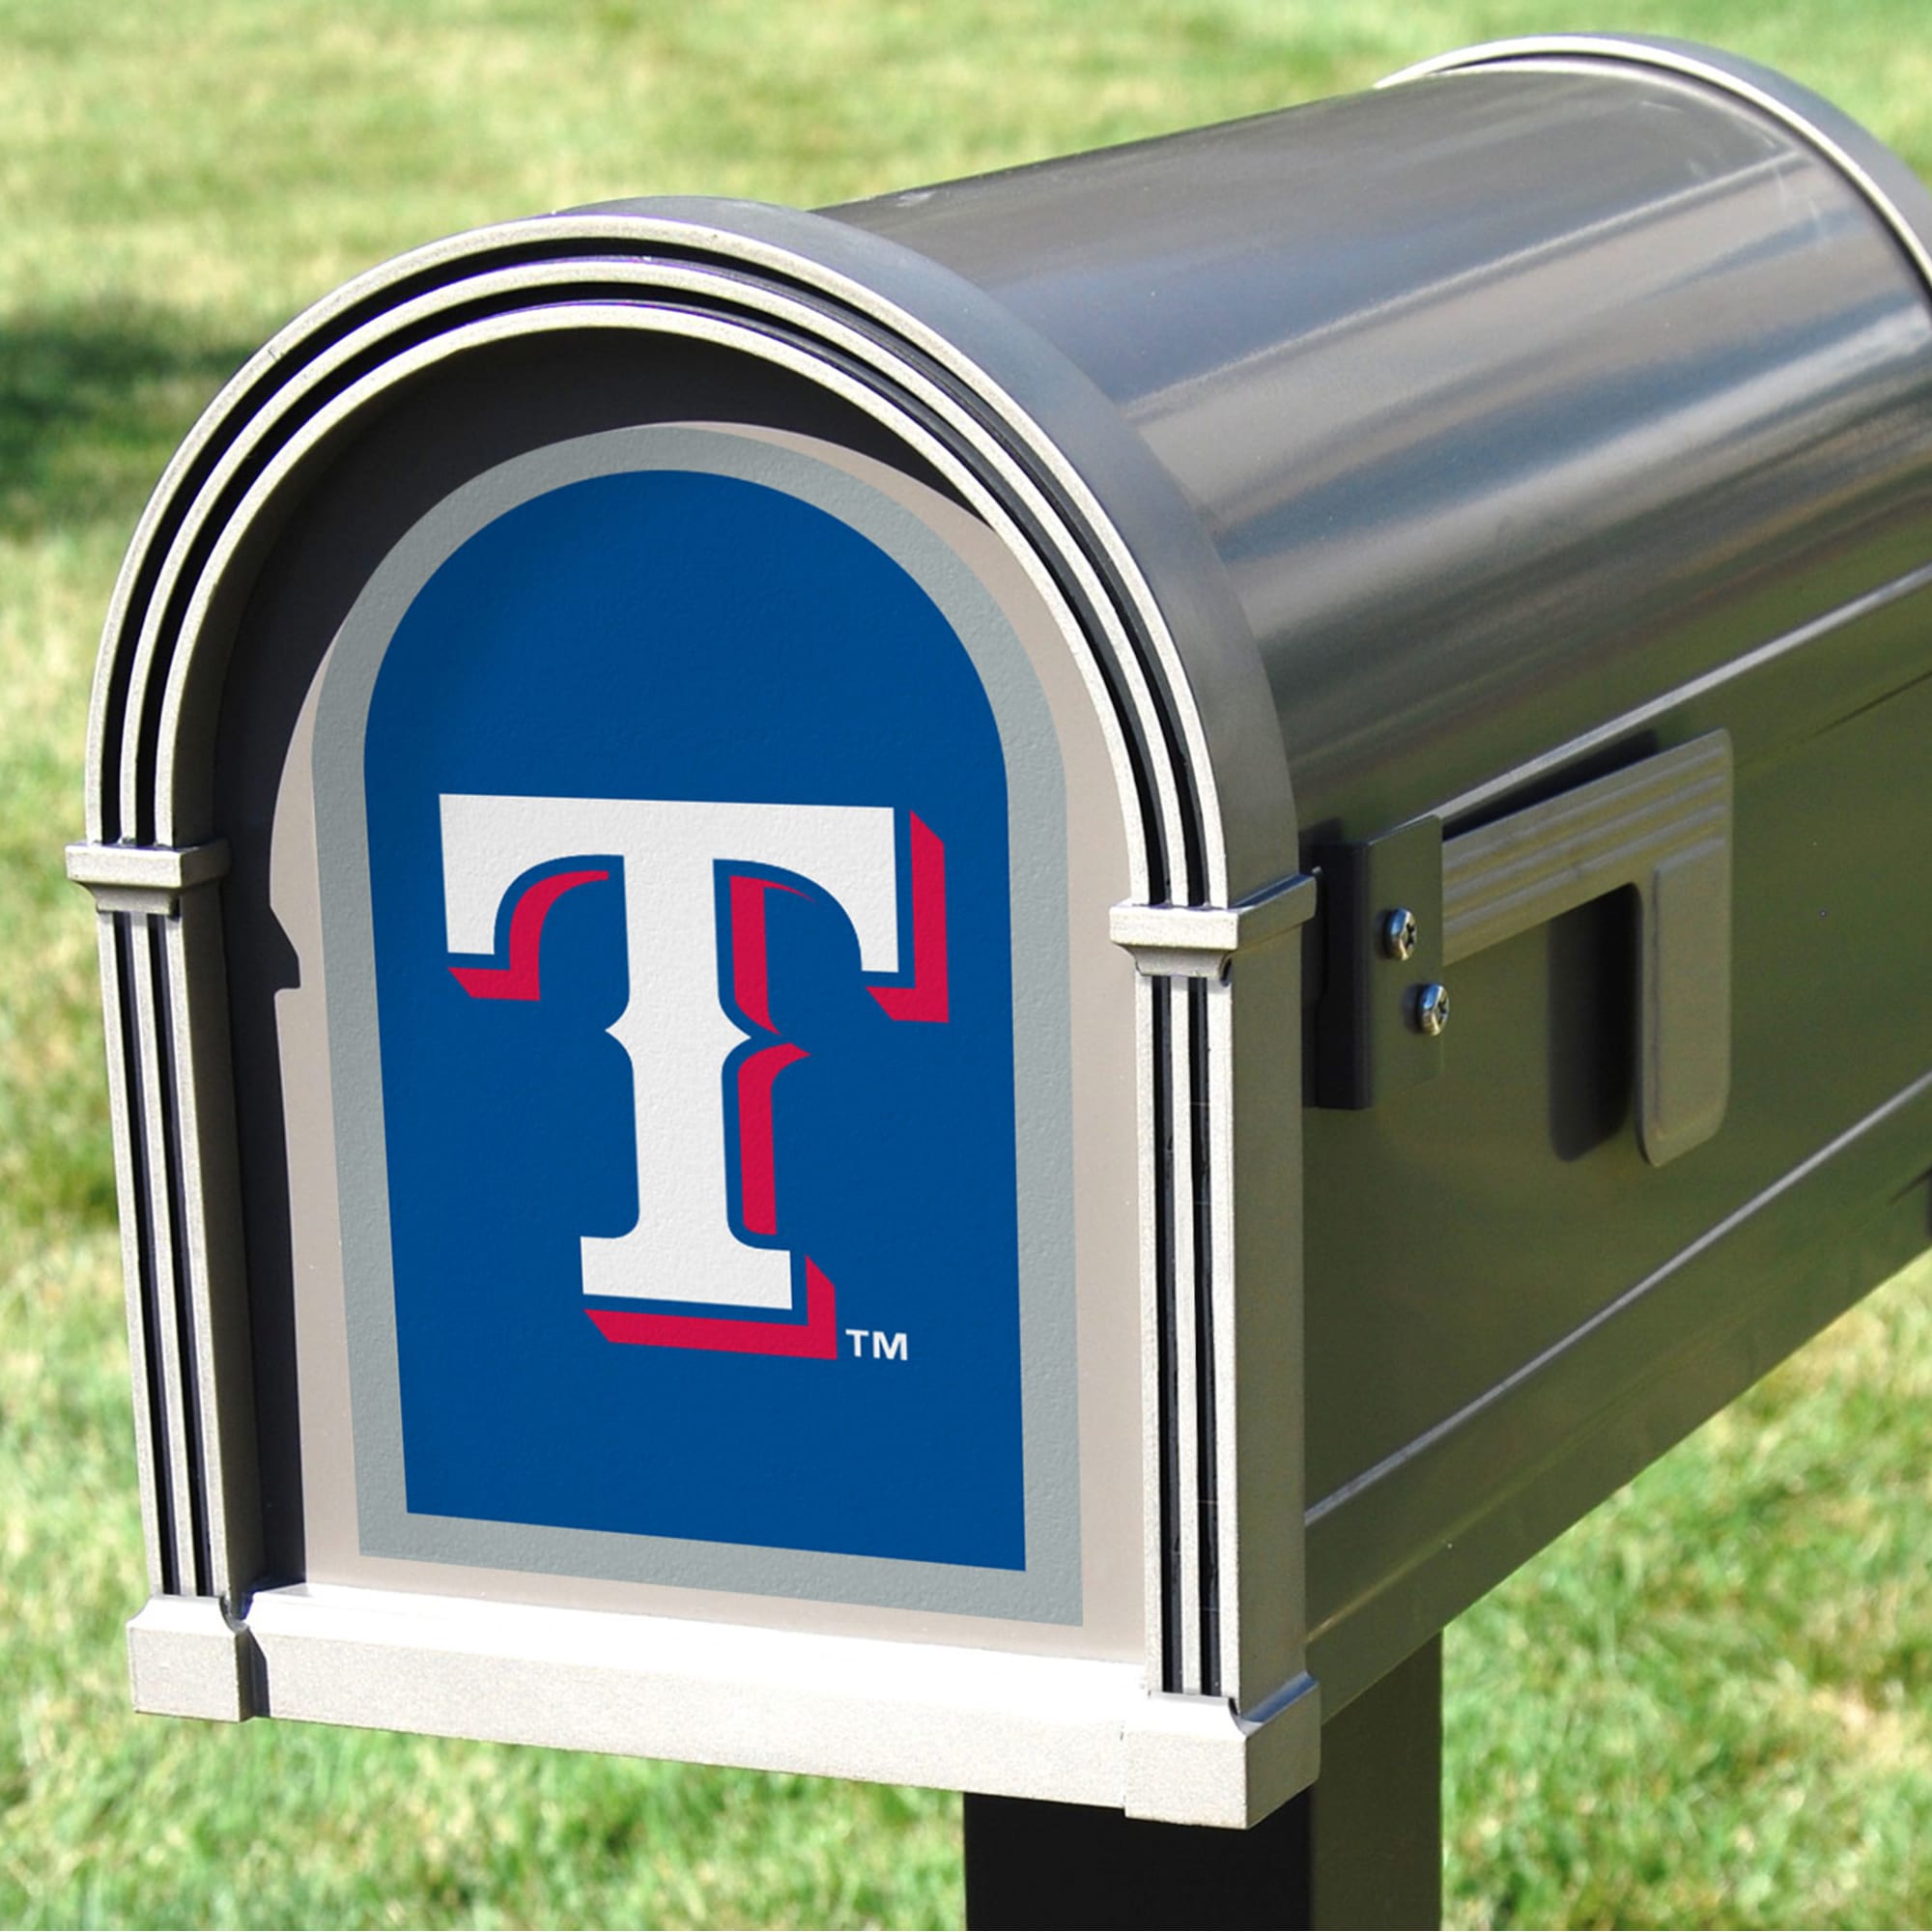 Texas Rangers: Mailbox Logo - Officially Licensed MLB Outdoor Graphic 5.0"W x 8.0"H by Fathead | Wood/Aluminum